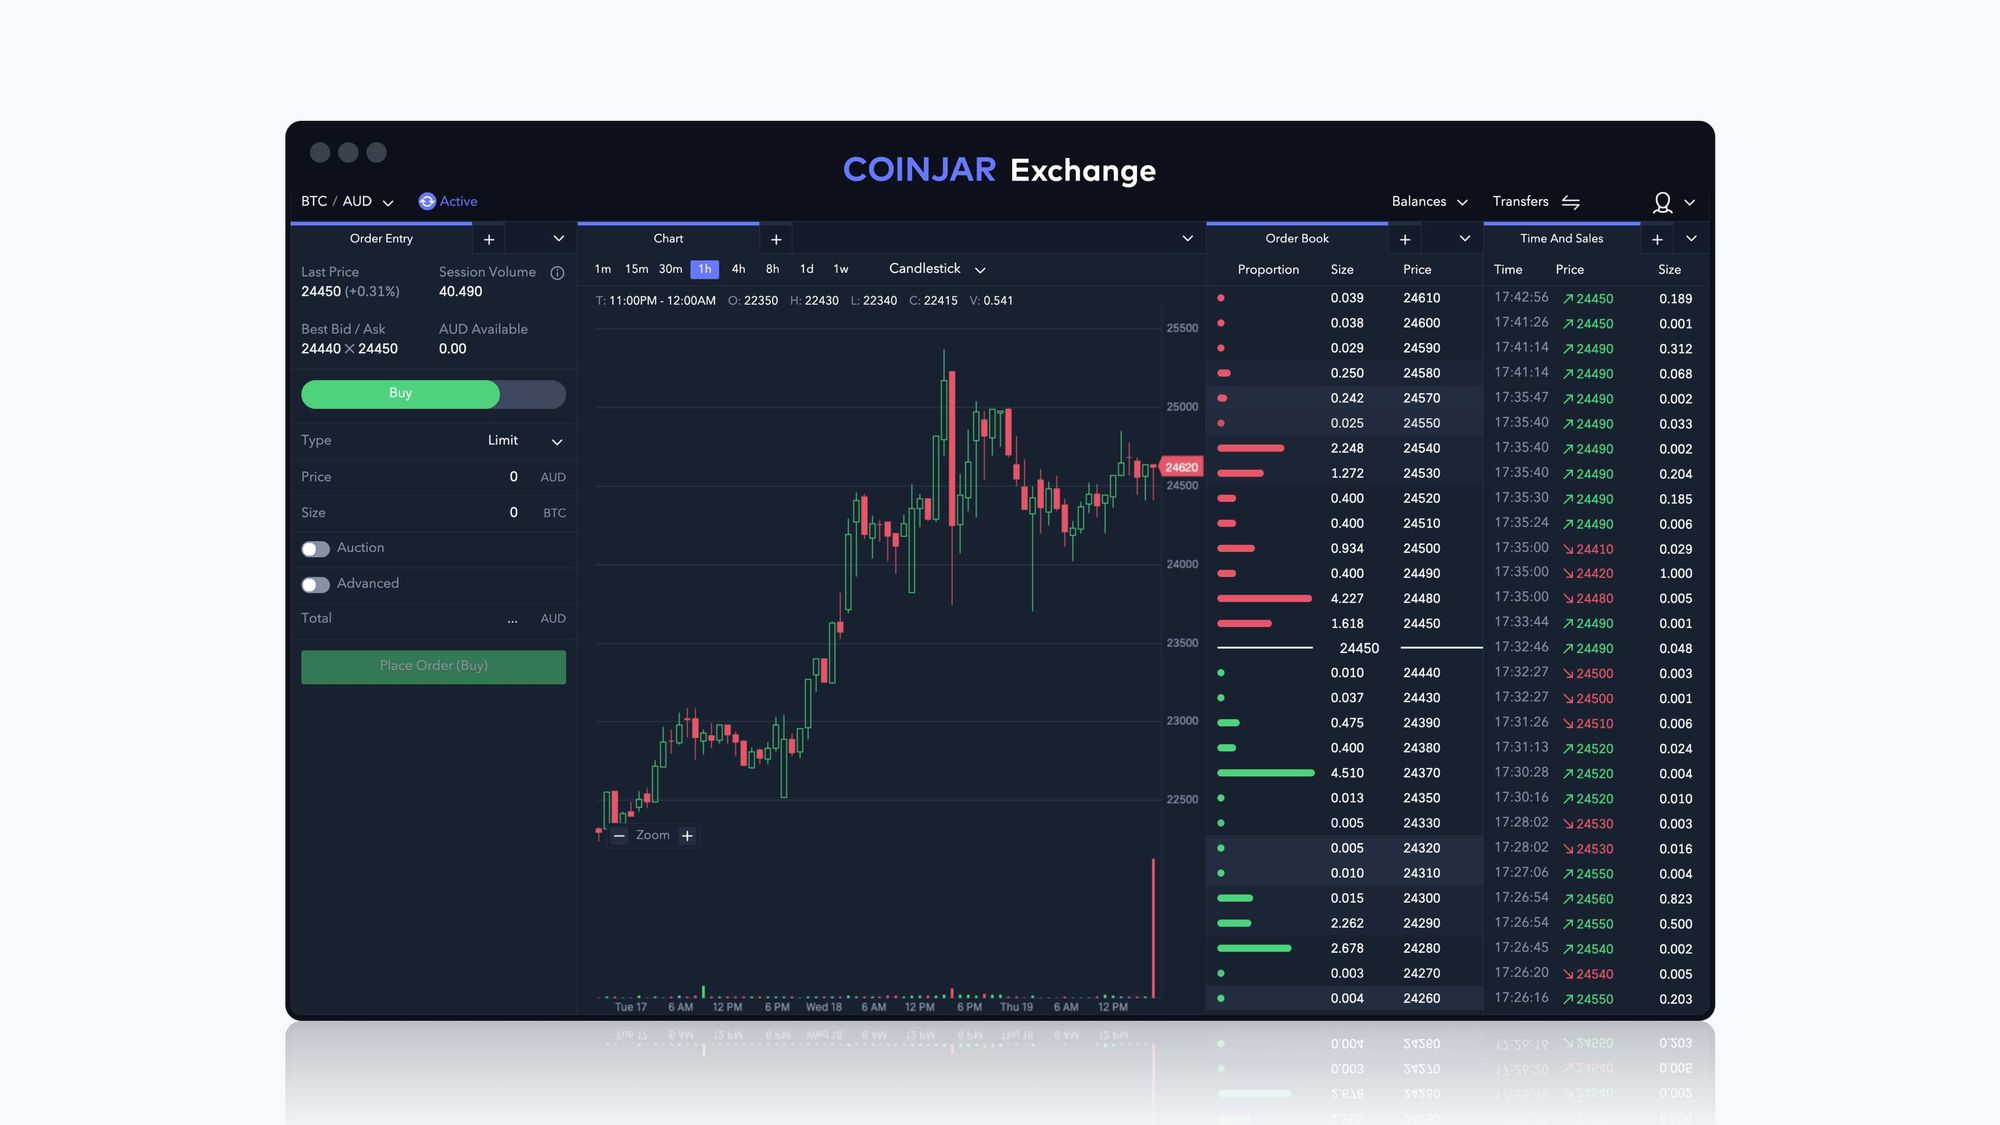 Changes to CoinJar Exchange fees from 1st of December 2020